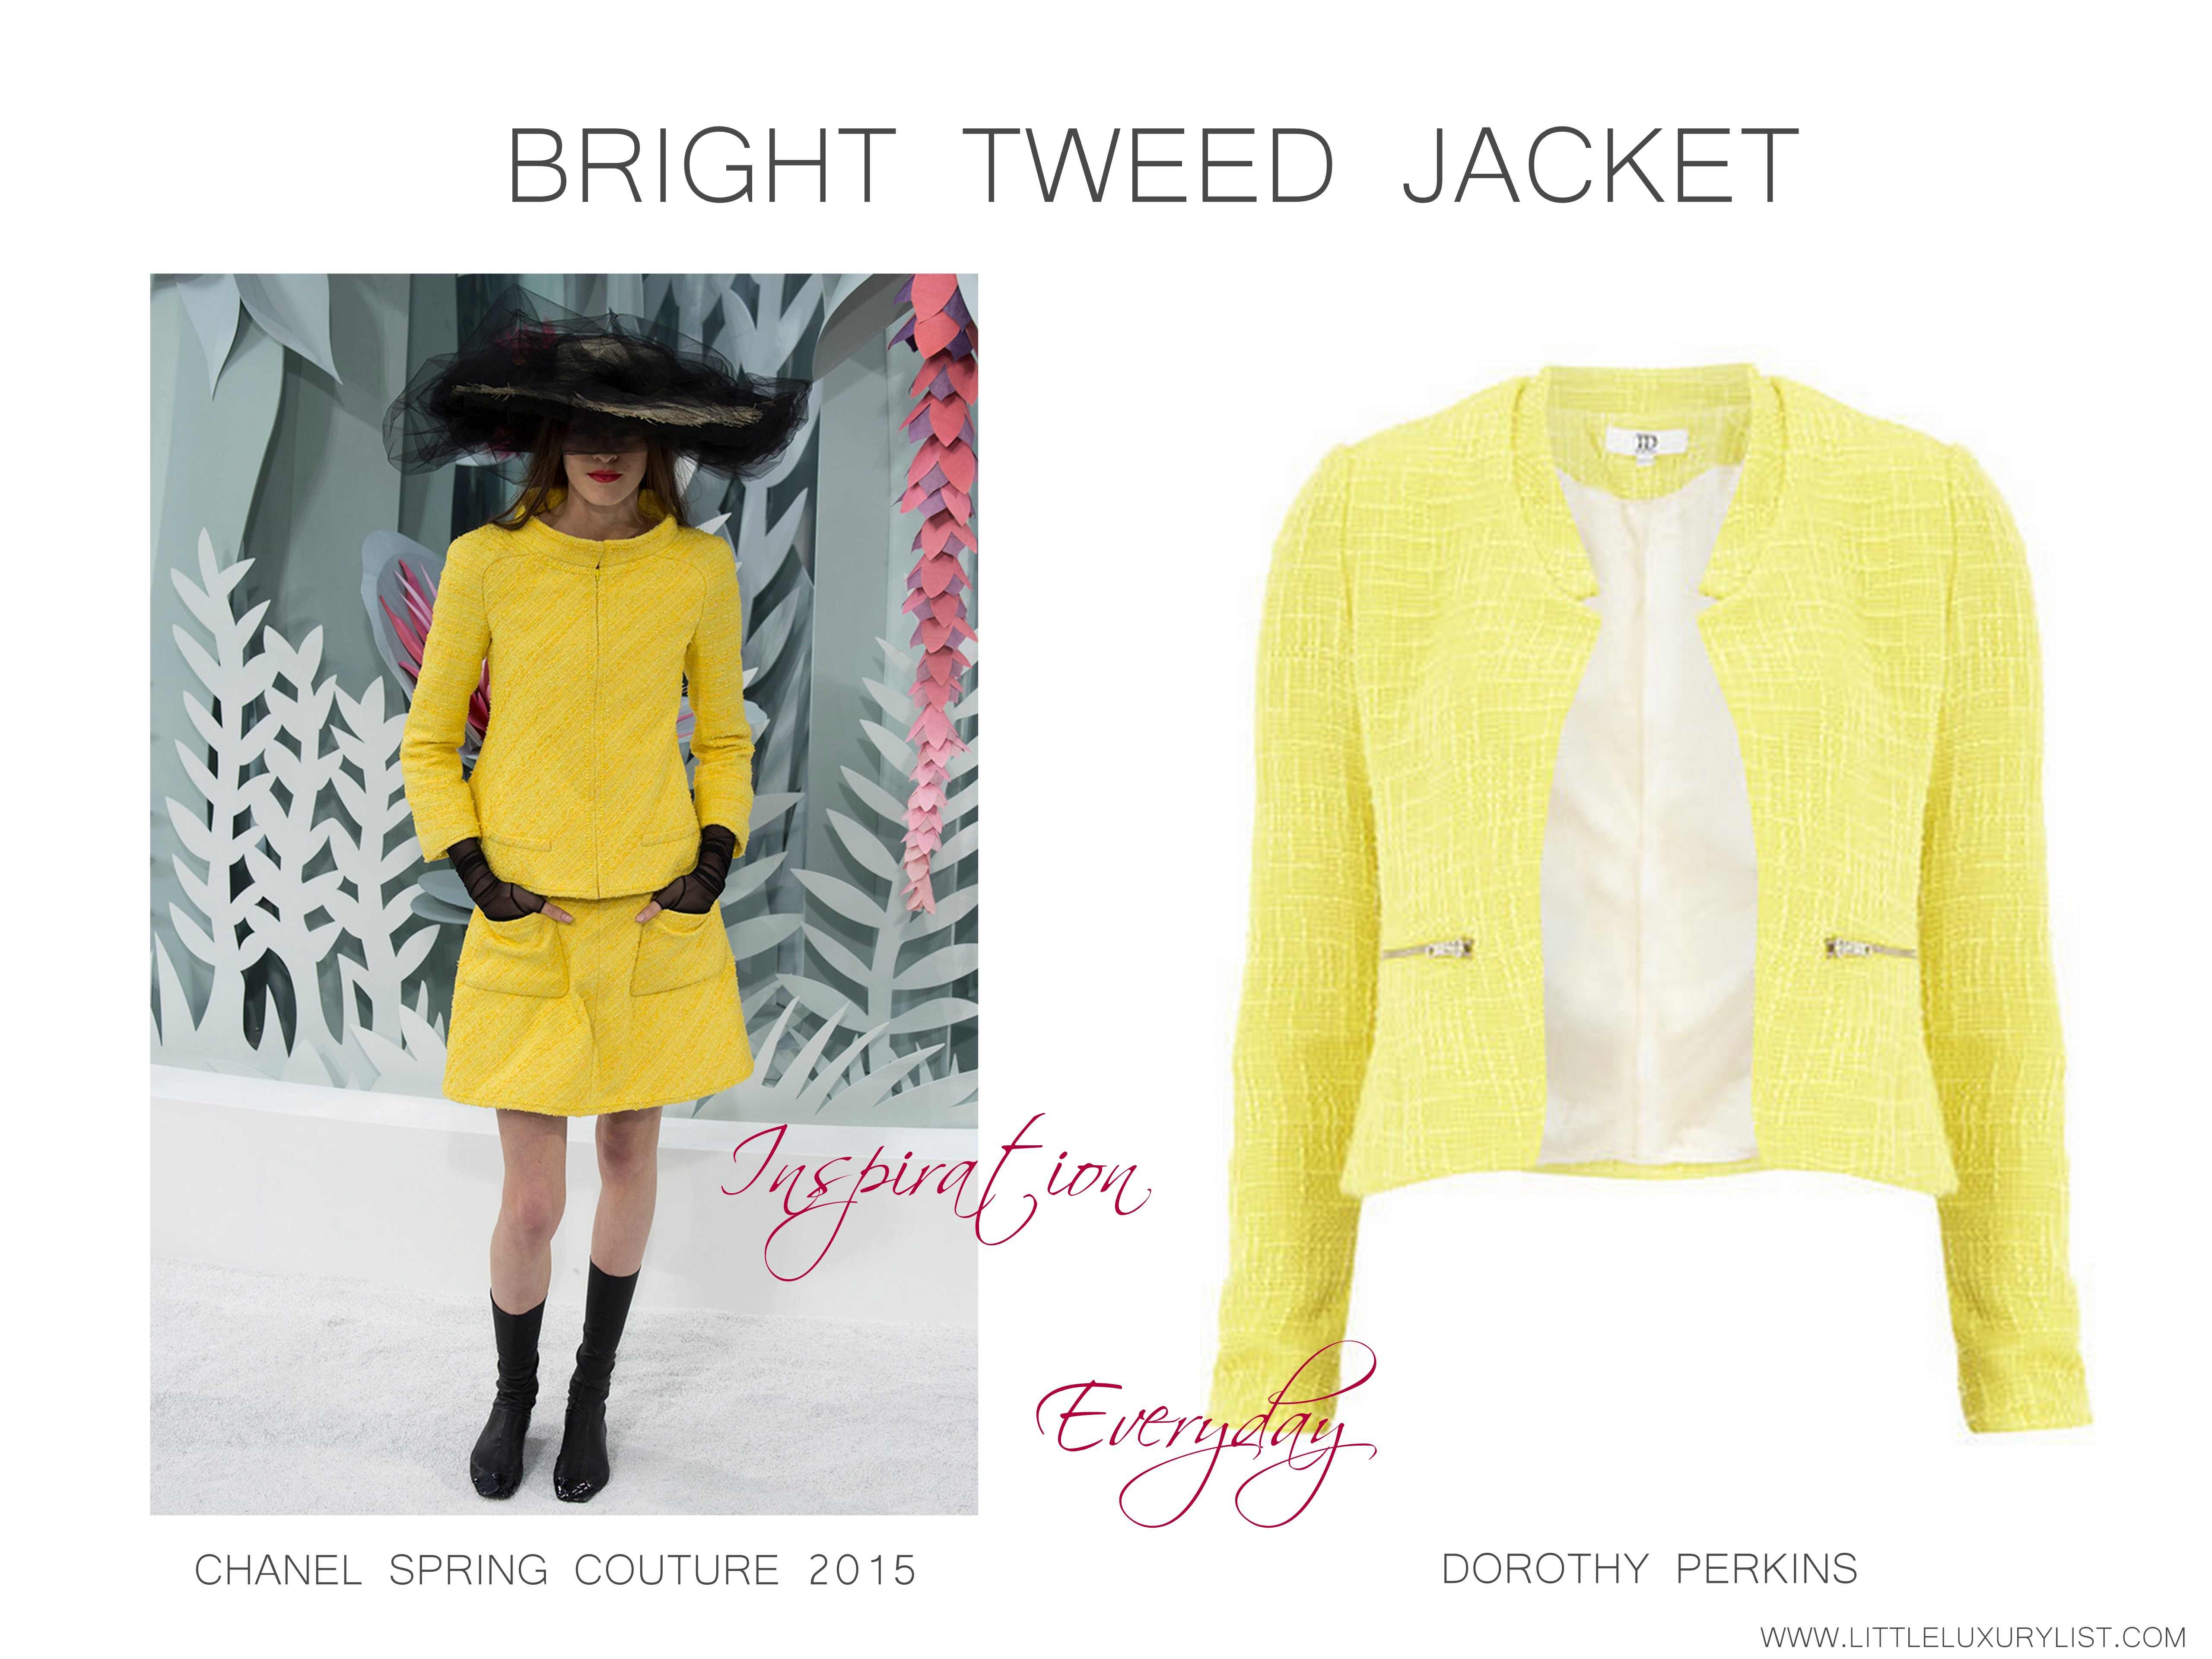 Bright Tweed Jacket Chanel Couture Spring 2015 Inspiration